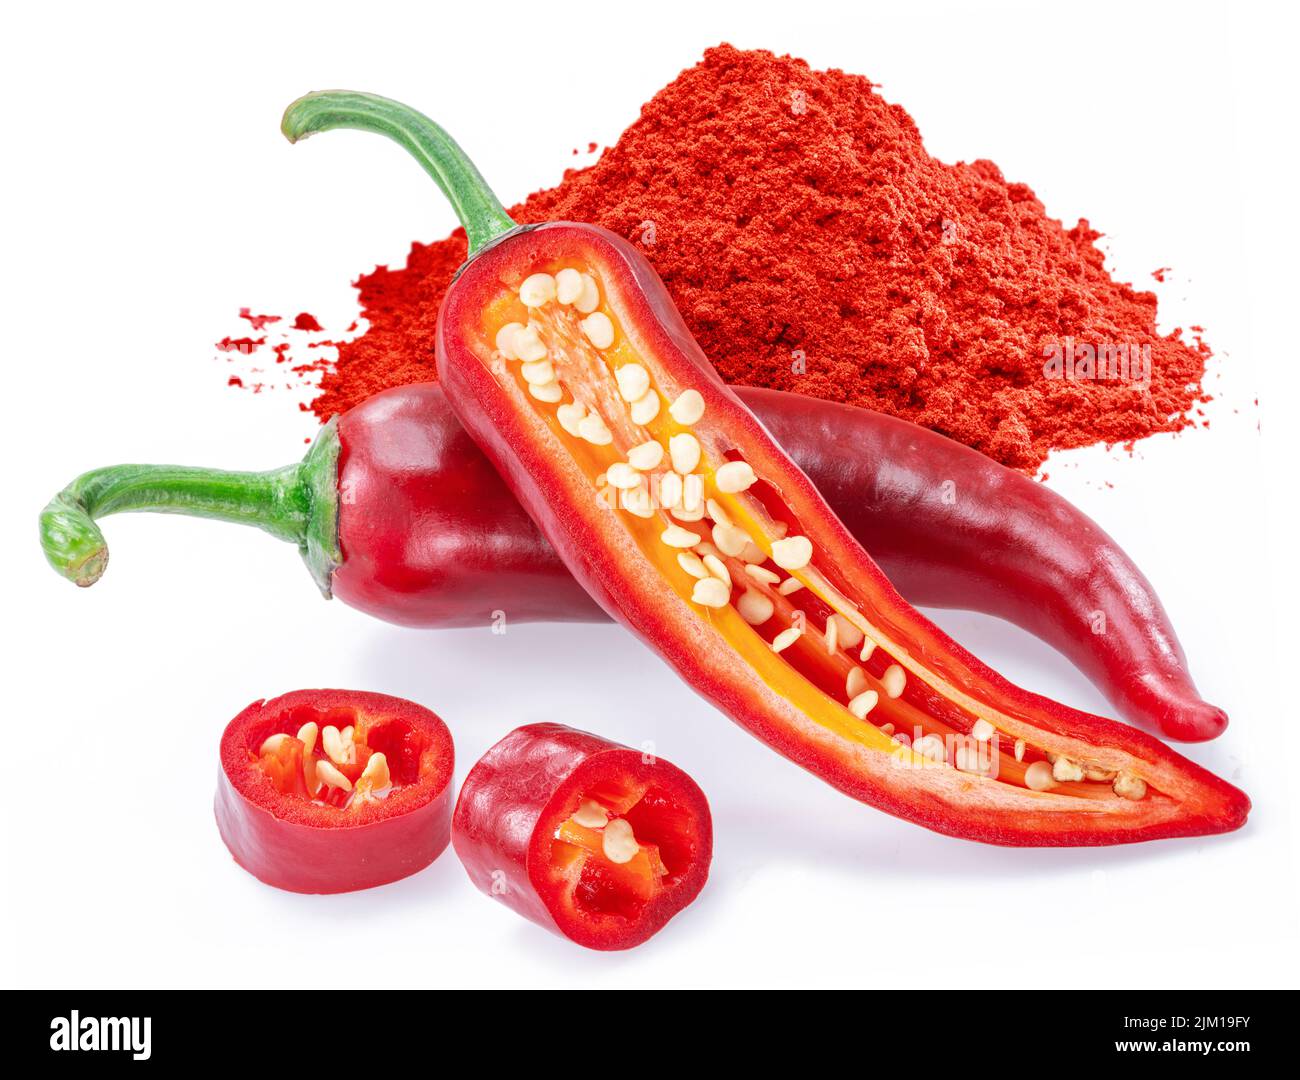 Fresh red chilli peppers, cross section of chilli pepper and ground cayenne pepper with seeds isolated on white background. Stock Photo